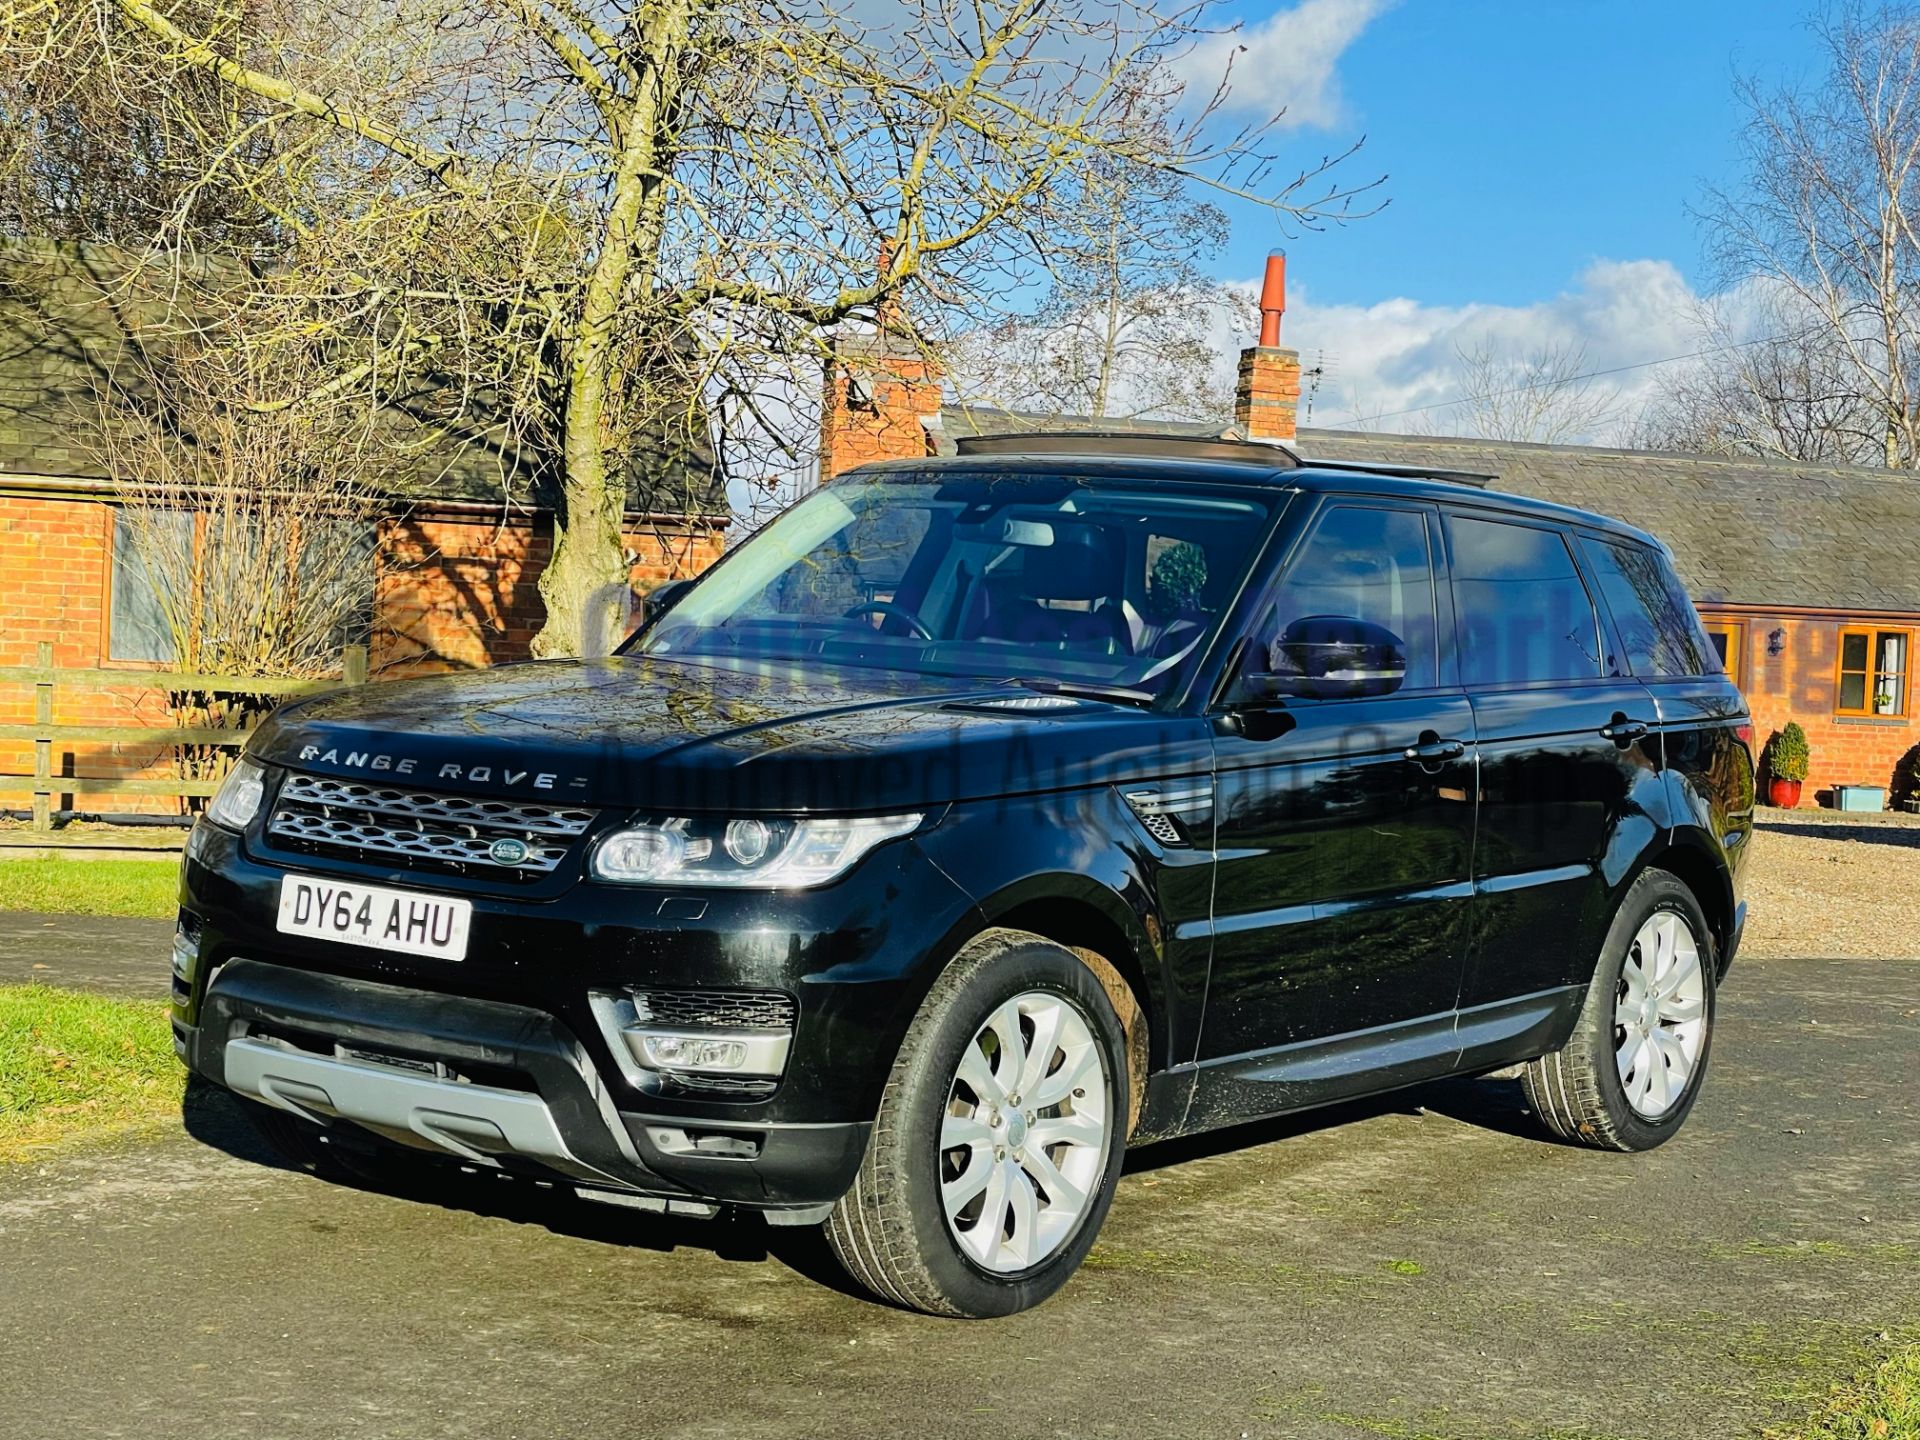 (ON SALE) RANGE ROVER SPORT *HSE EDITION* SUV (2015-NEW MODEL) '3.0 SDV6-8 SPEED AUTO'*FULLY LOADED* - Image 6 of 61